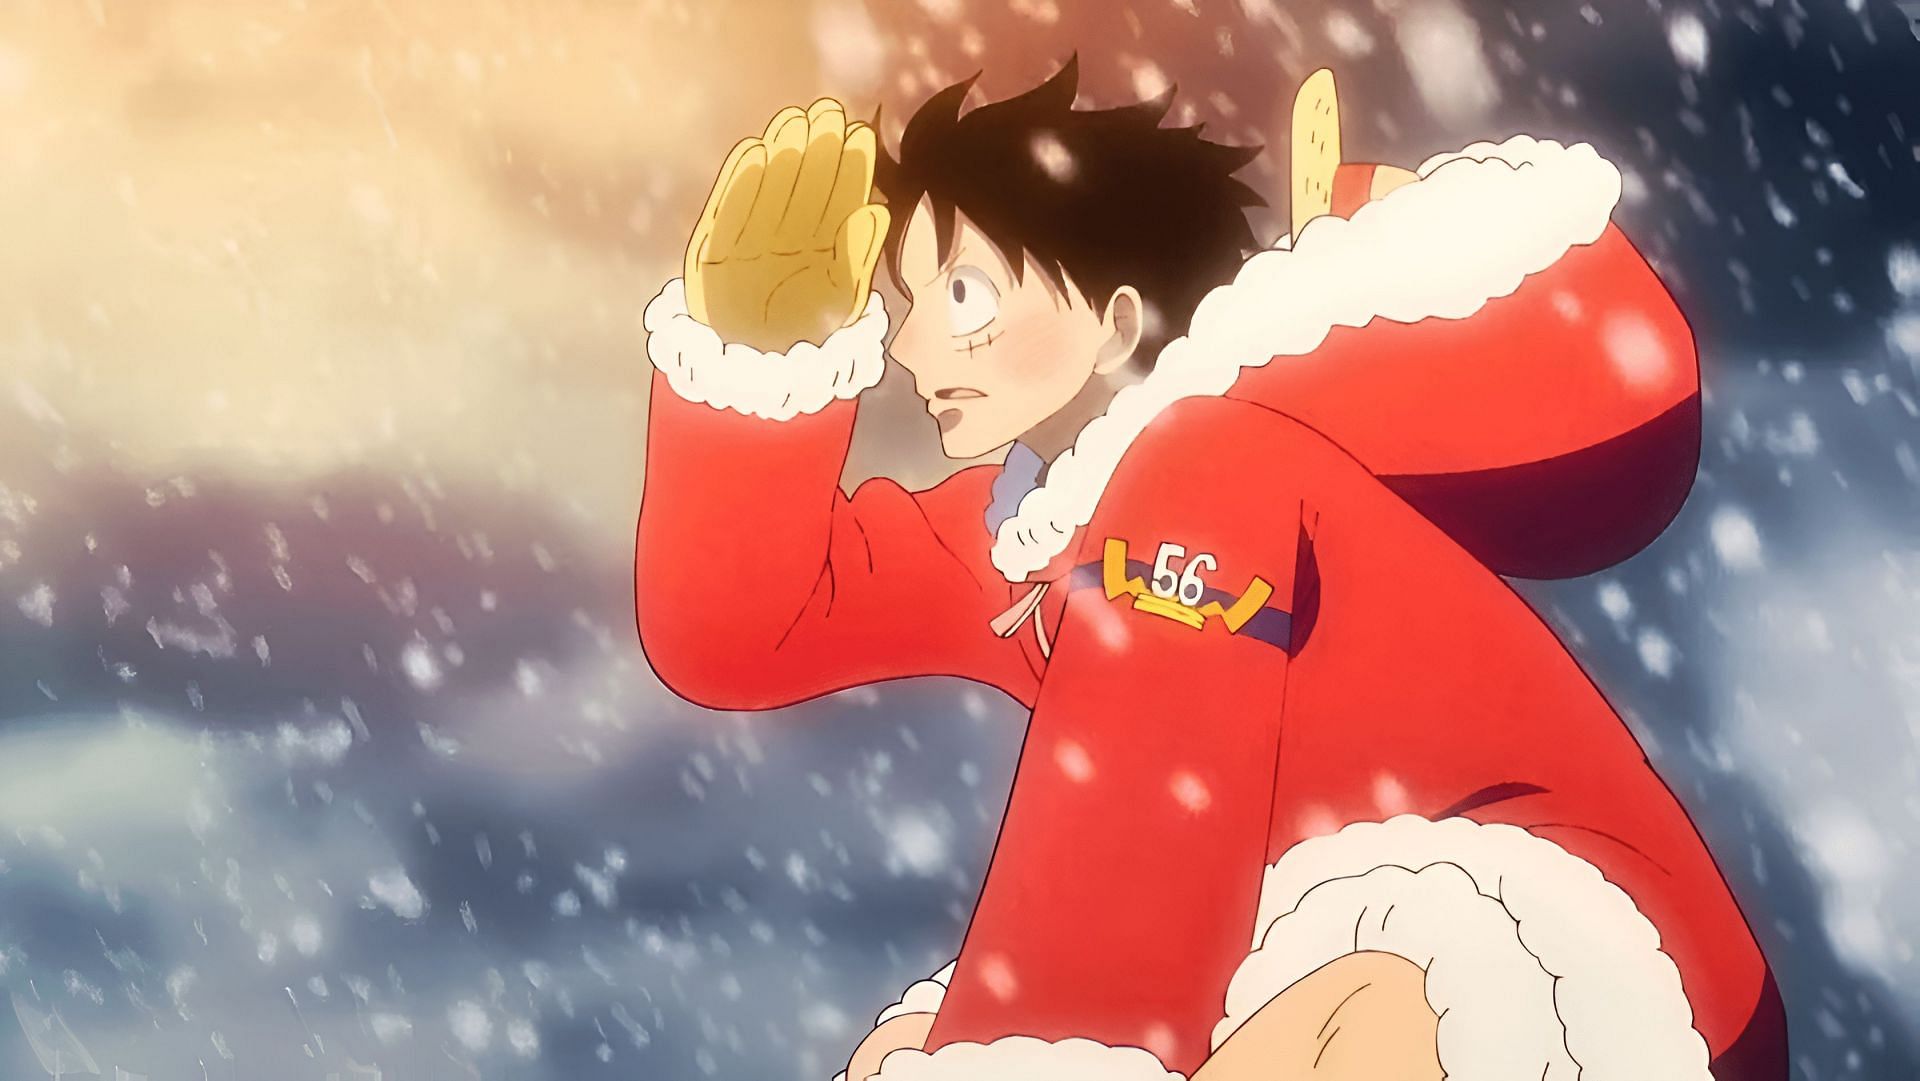 Luffy as seen in the anime (Image via Toei Animation)